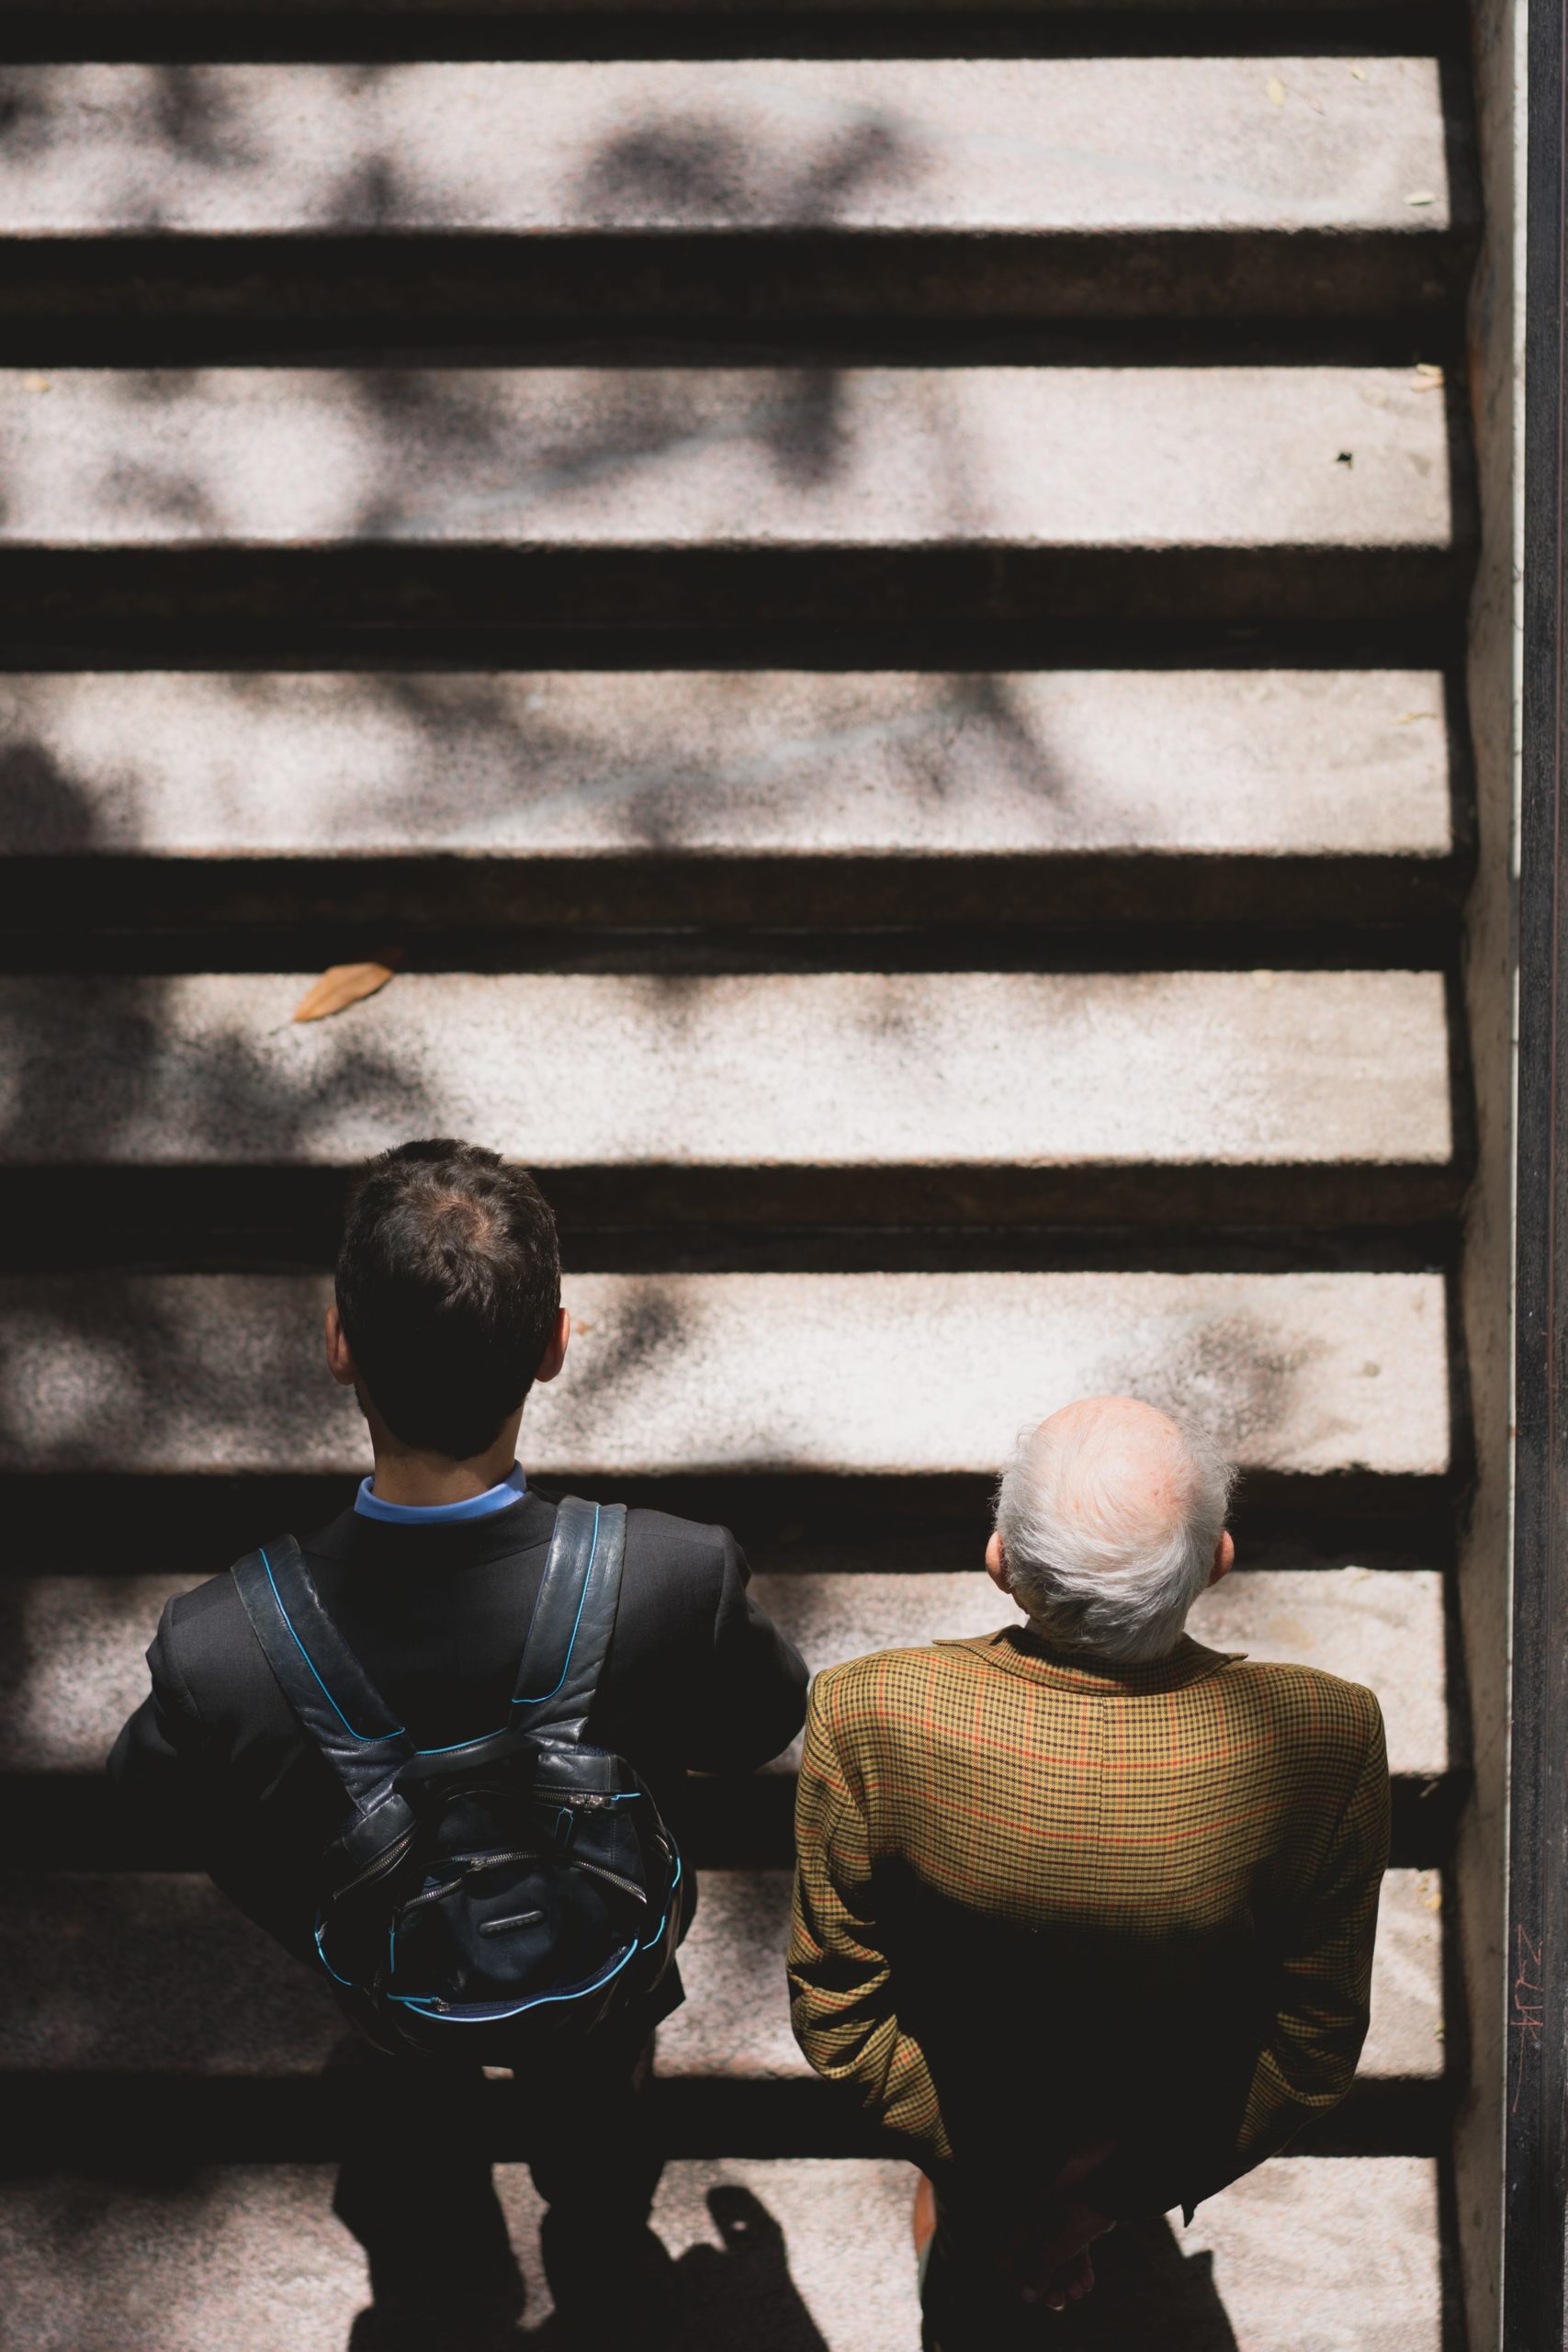 A younger man walks up the stairs with an older man